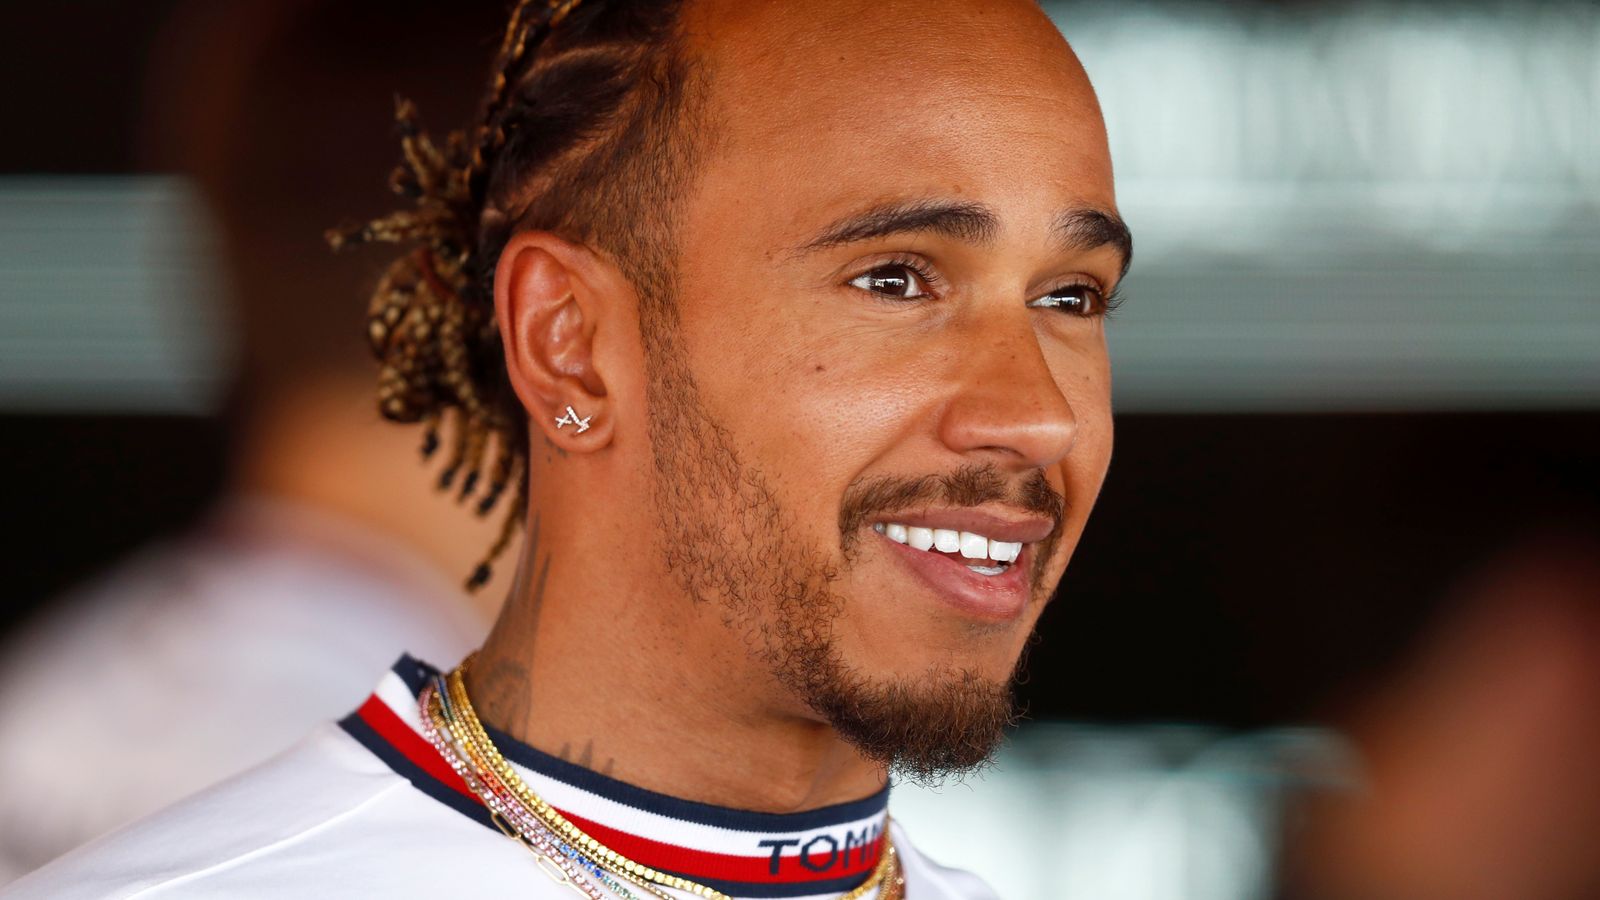 Spanish GP: Lewis Hamilton ‘super happy’ with Mercedes progress after crucial upgrades